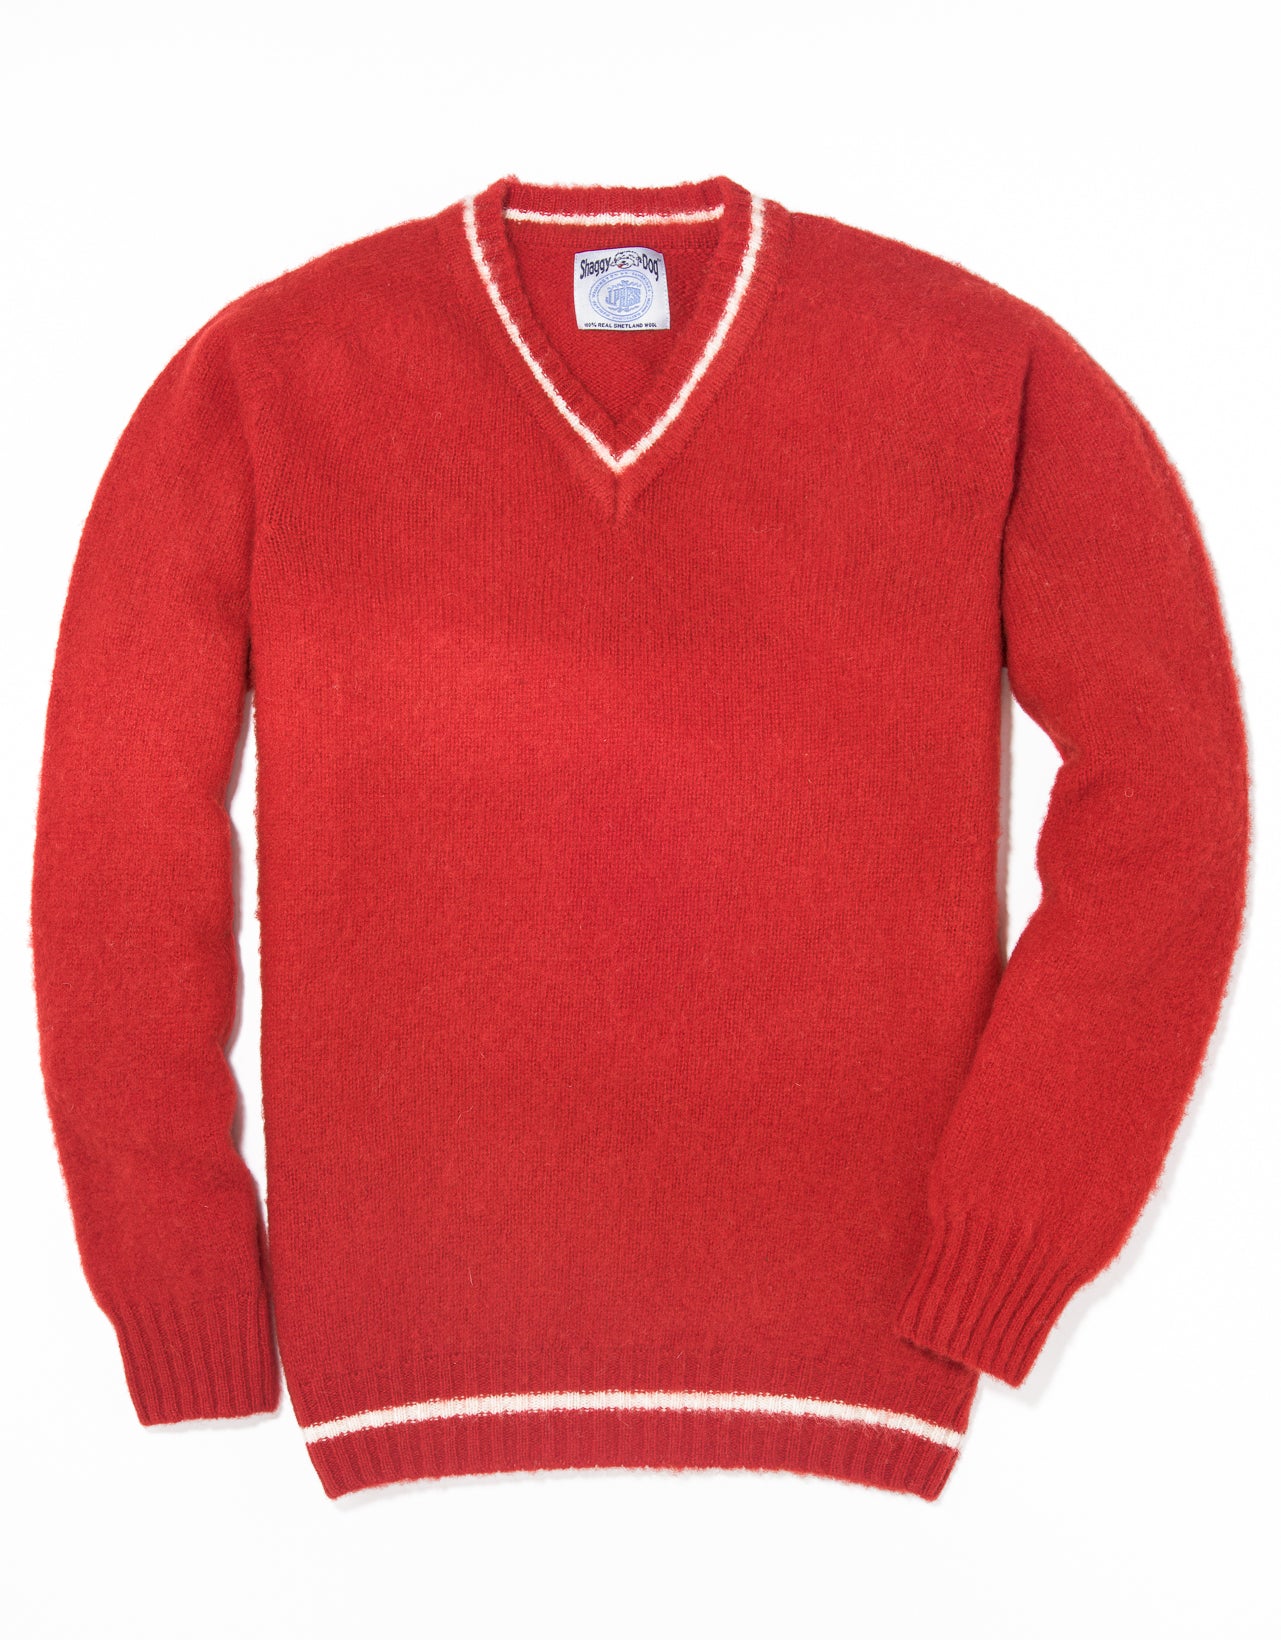 SHAGGY DOG V-NECK SWEATER RED - TRIM FIT